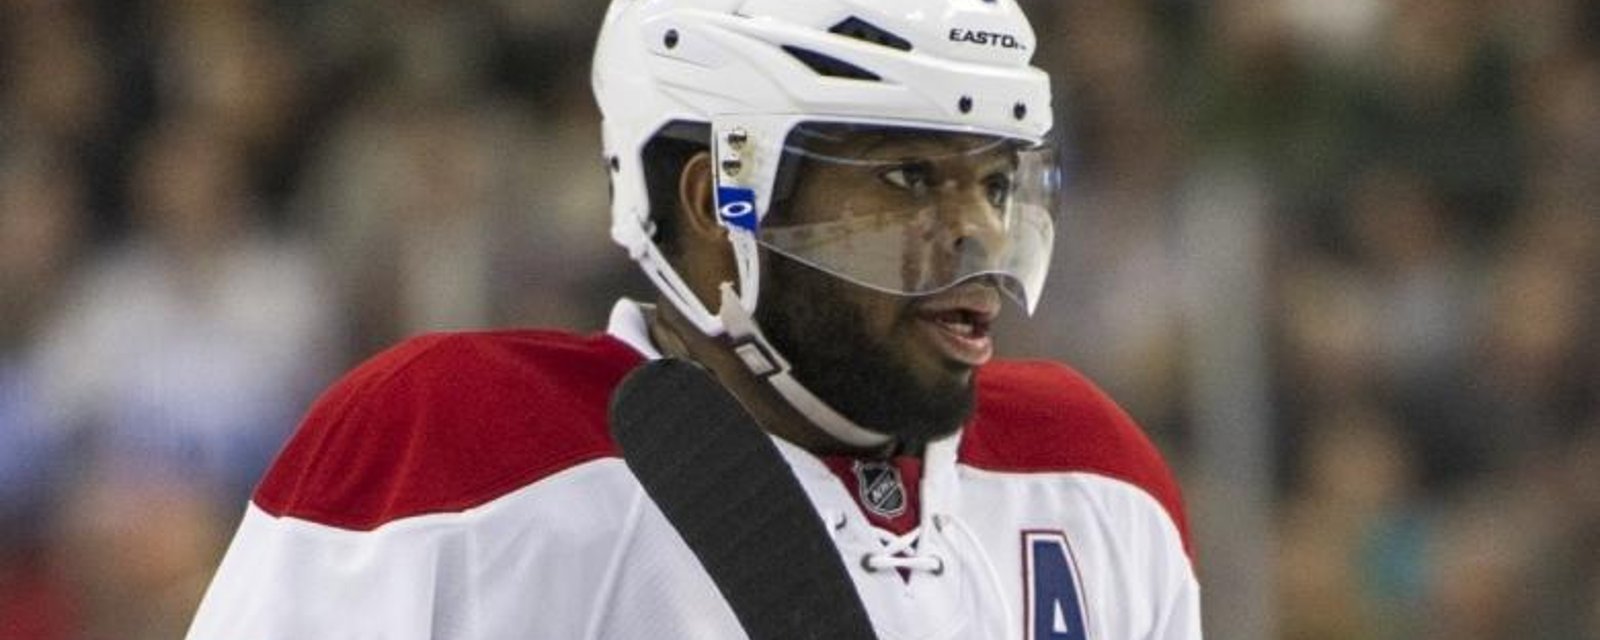 Canadiens may have been overly optimistic about Subban recovery. 